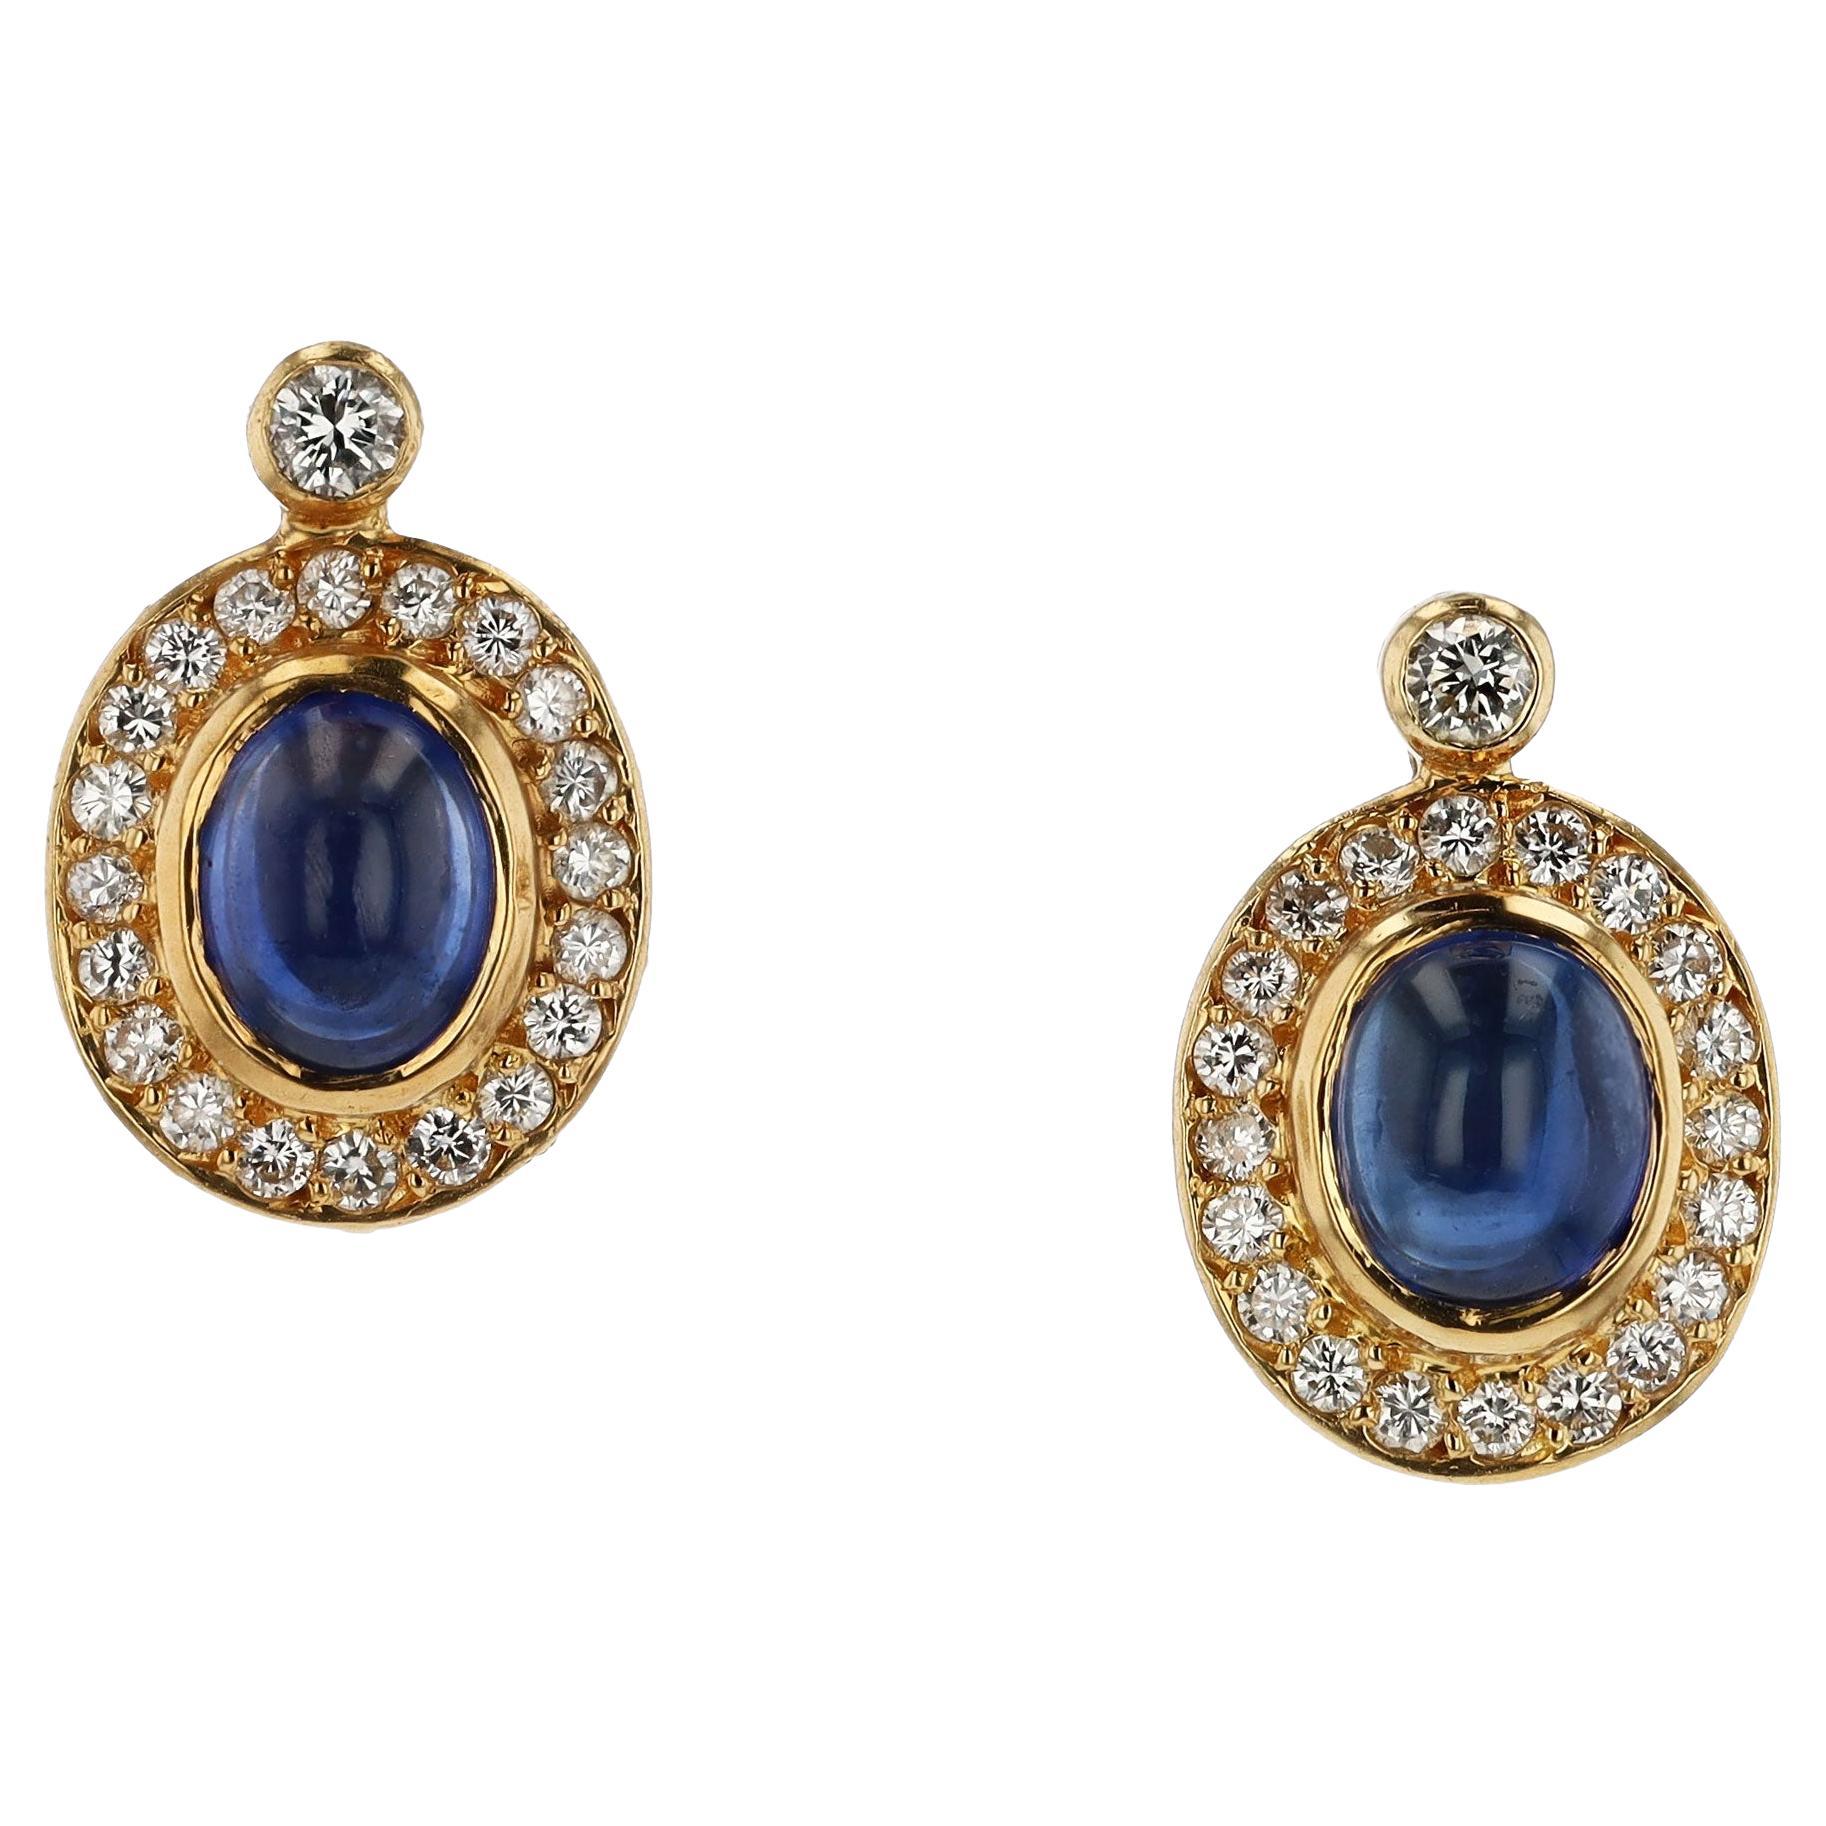 Vintage 3 Carat Cabochon Sapphire and Diamond Earrings